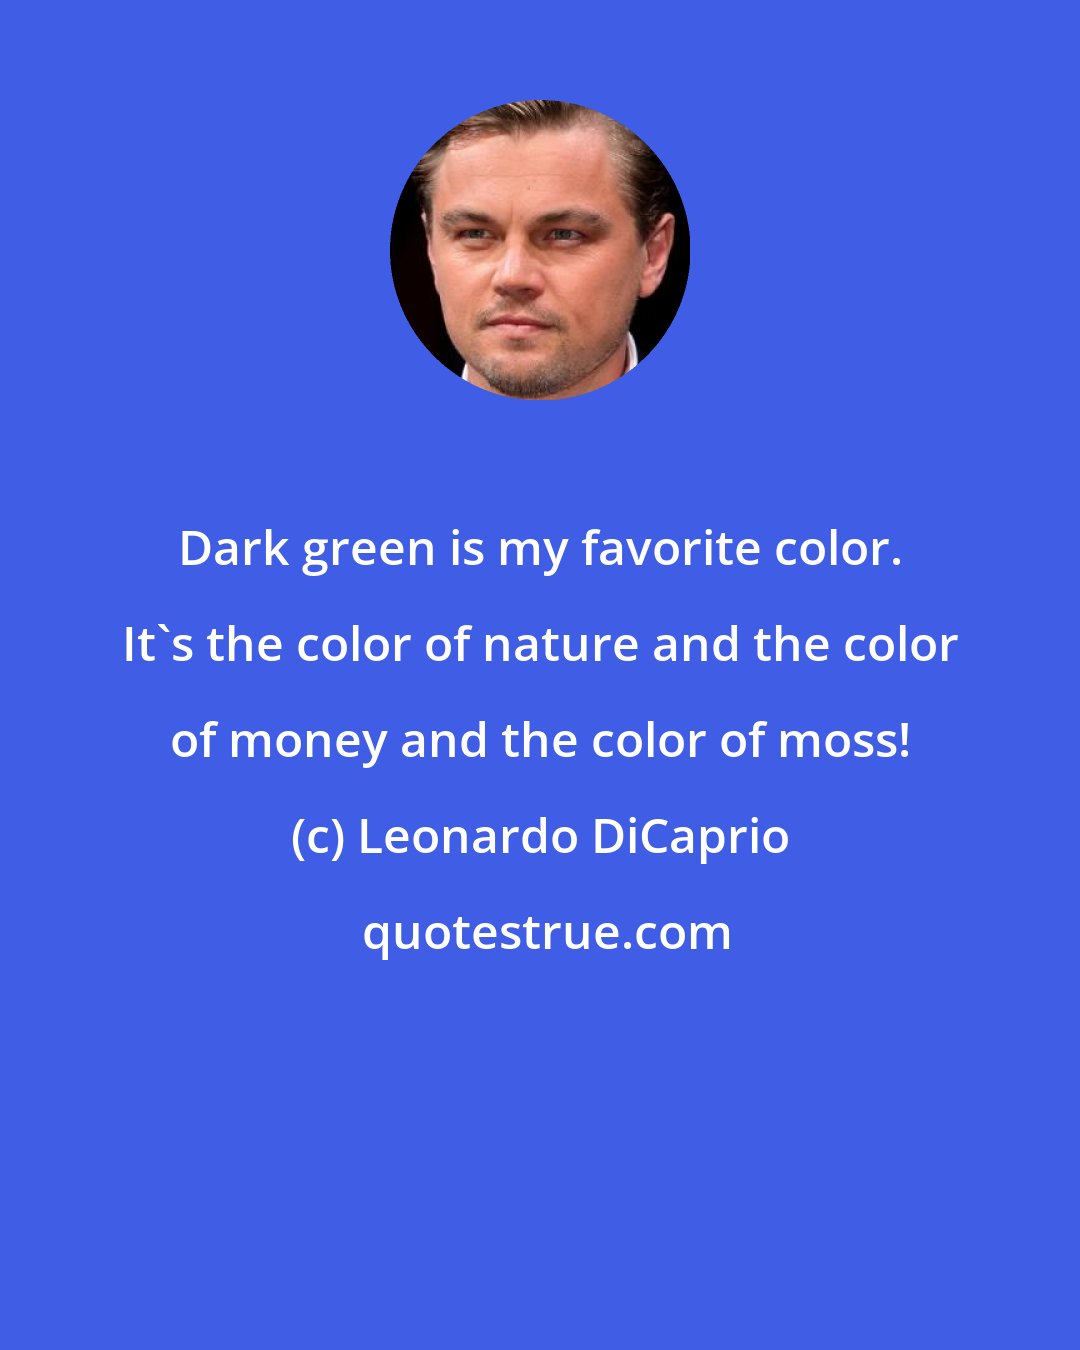 Leonardo DiCaprio: Dark green is my favorite color. It's the color of nature and the color of money and the color of moss!